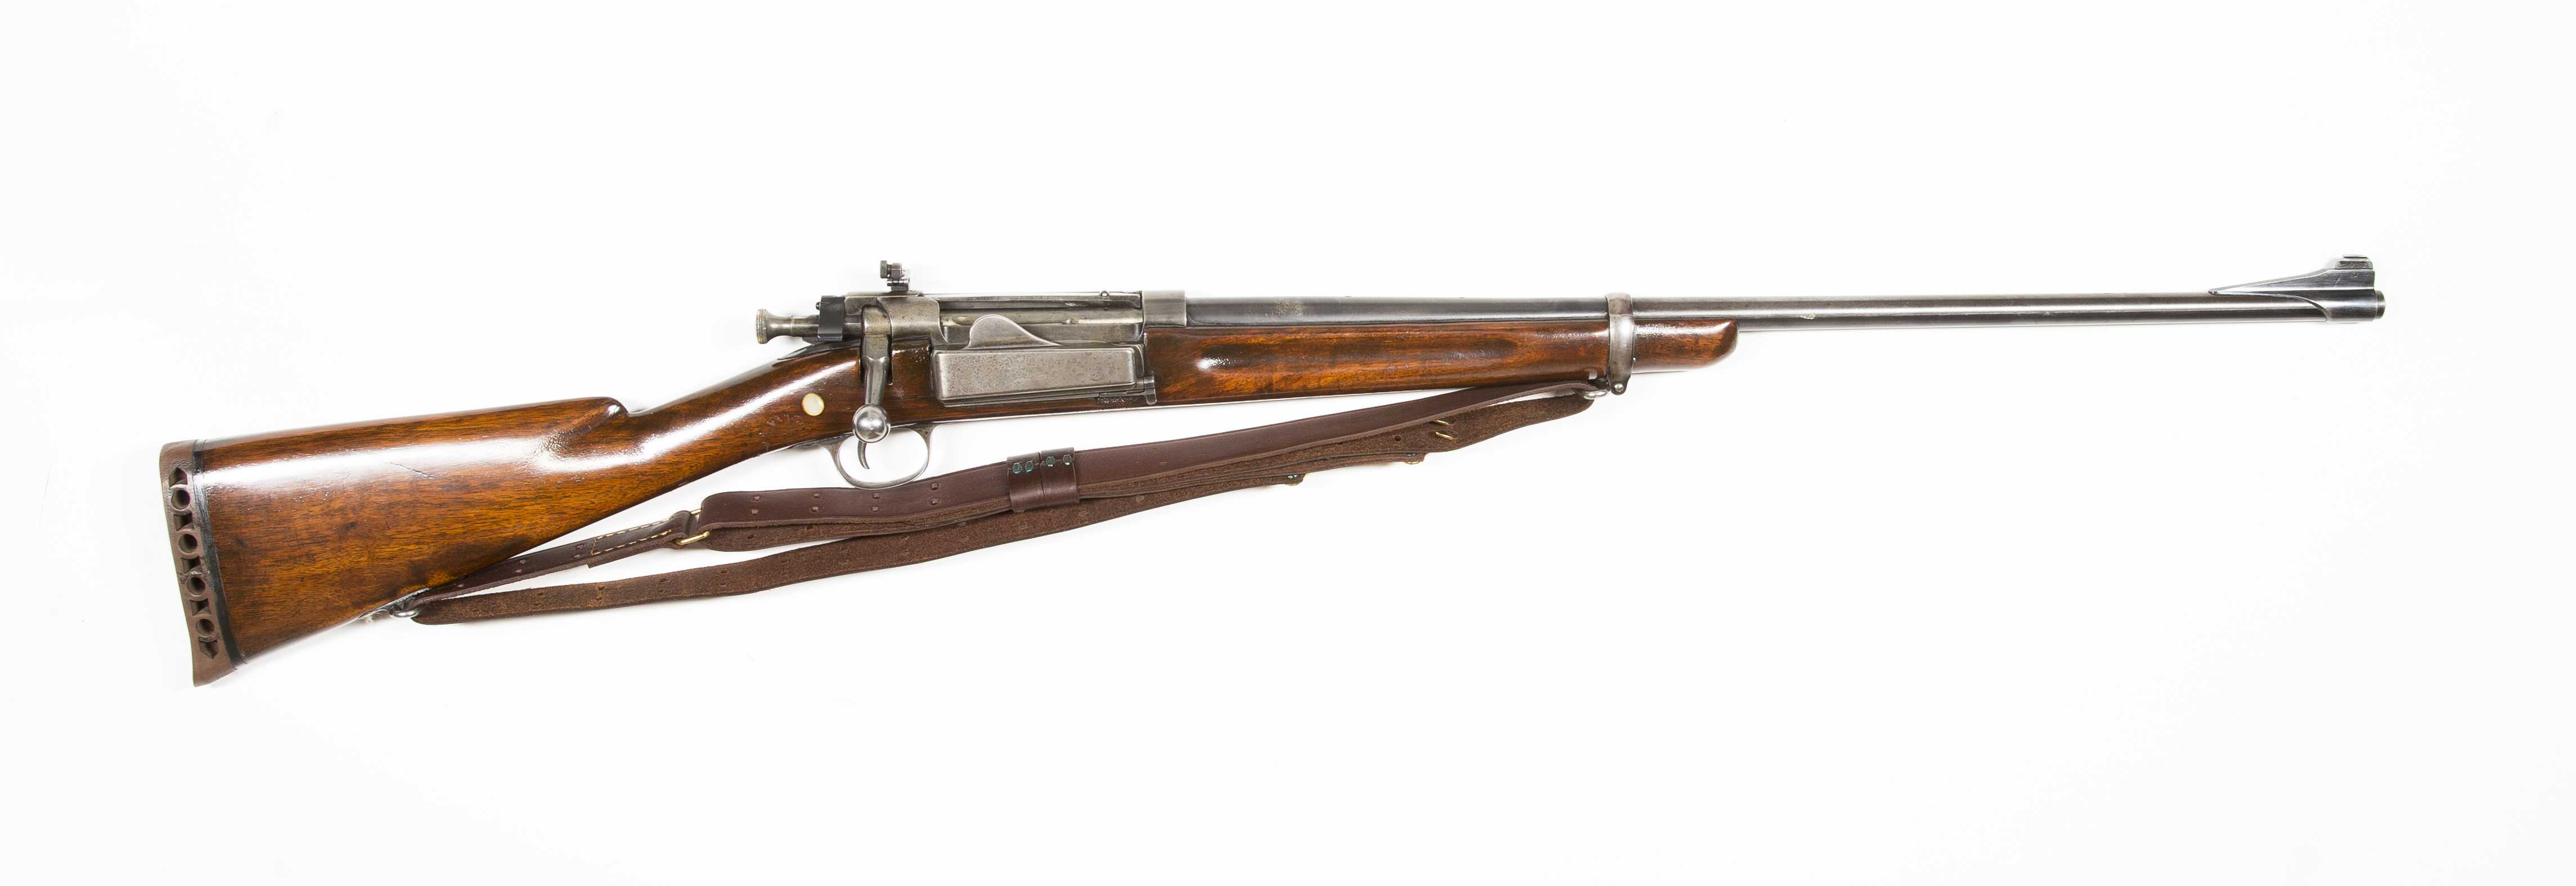 springfield 1898 rifle for sale